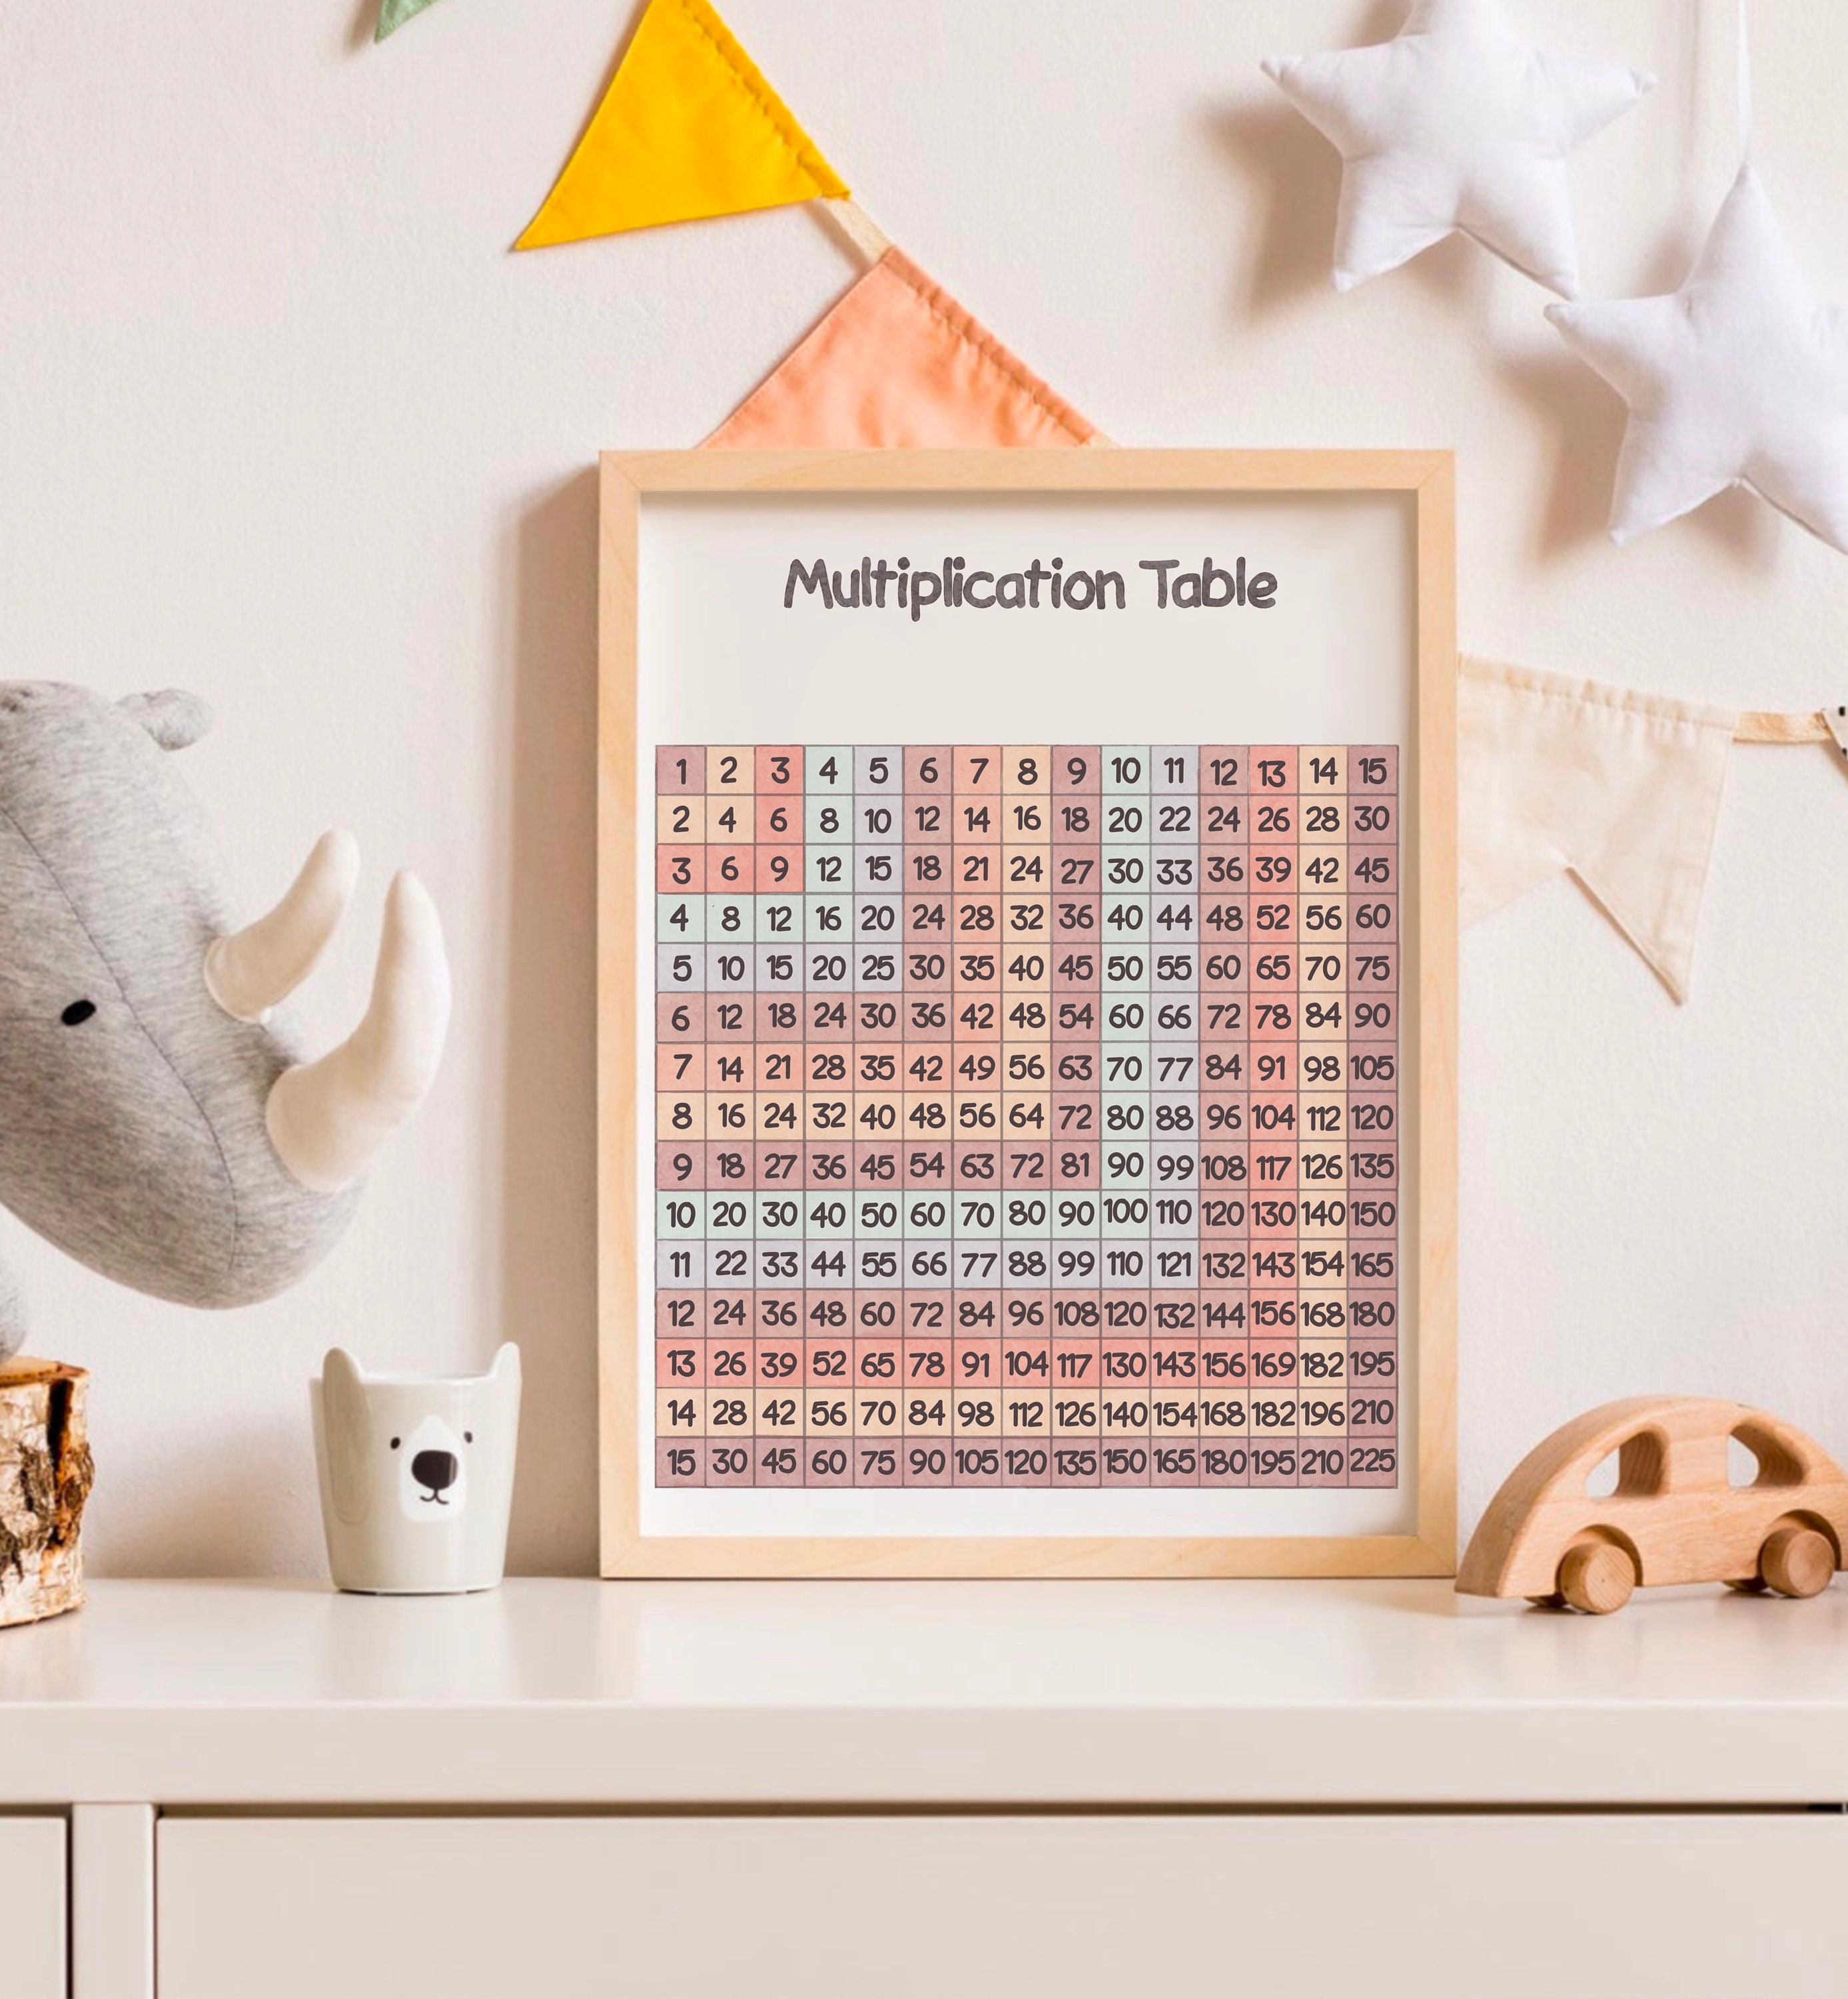 Educational Multiplication Table 112 Canvas Wall Art For Childrens Room ▻   ▻ Free Shipping ▻ Up to 70% OFF